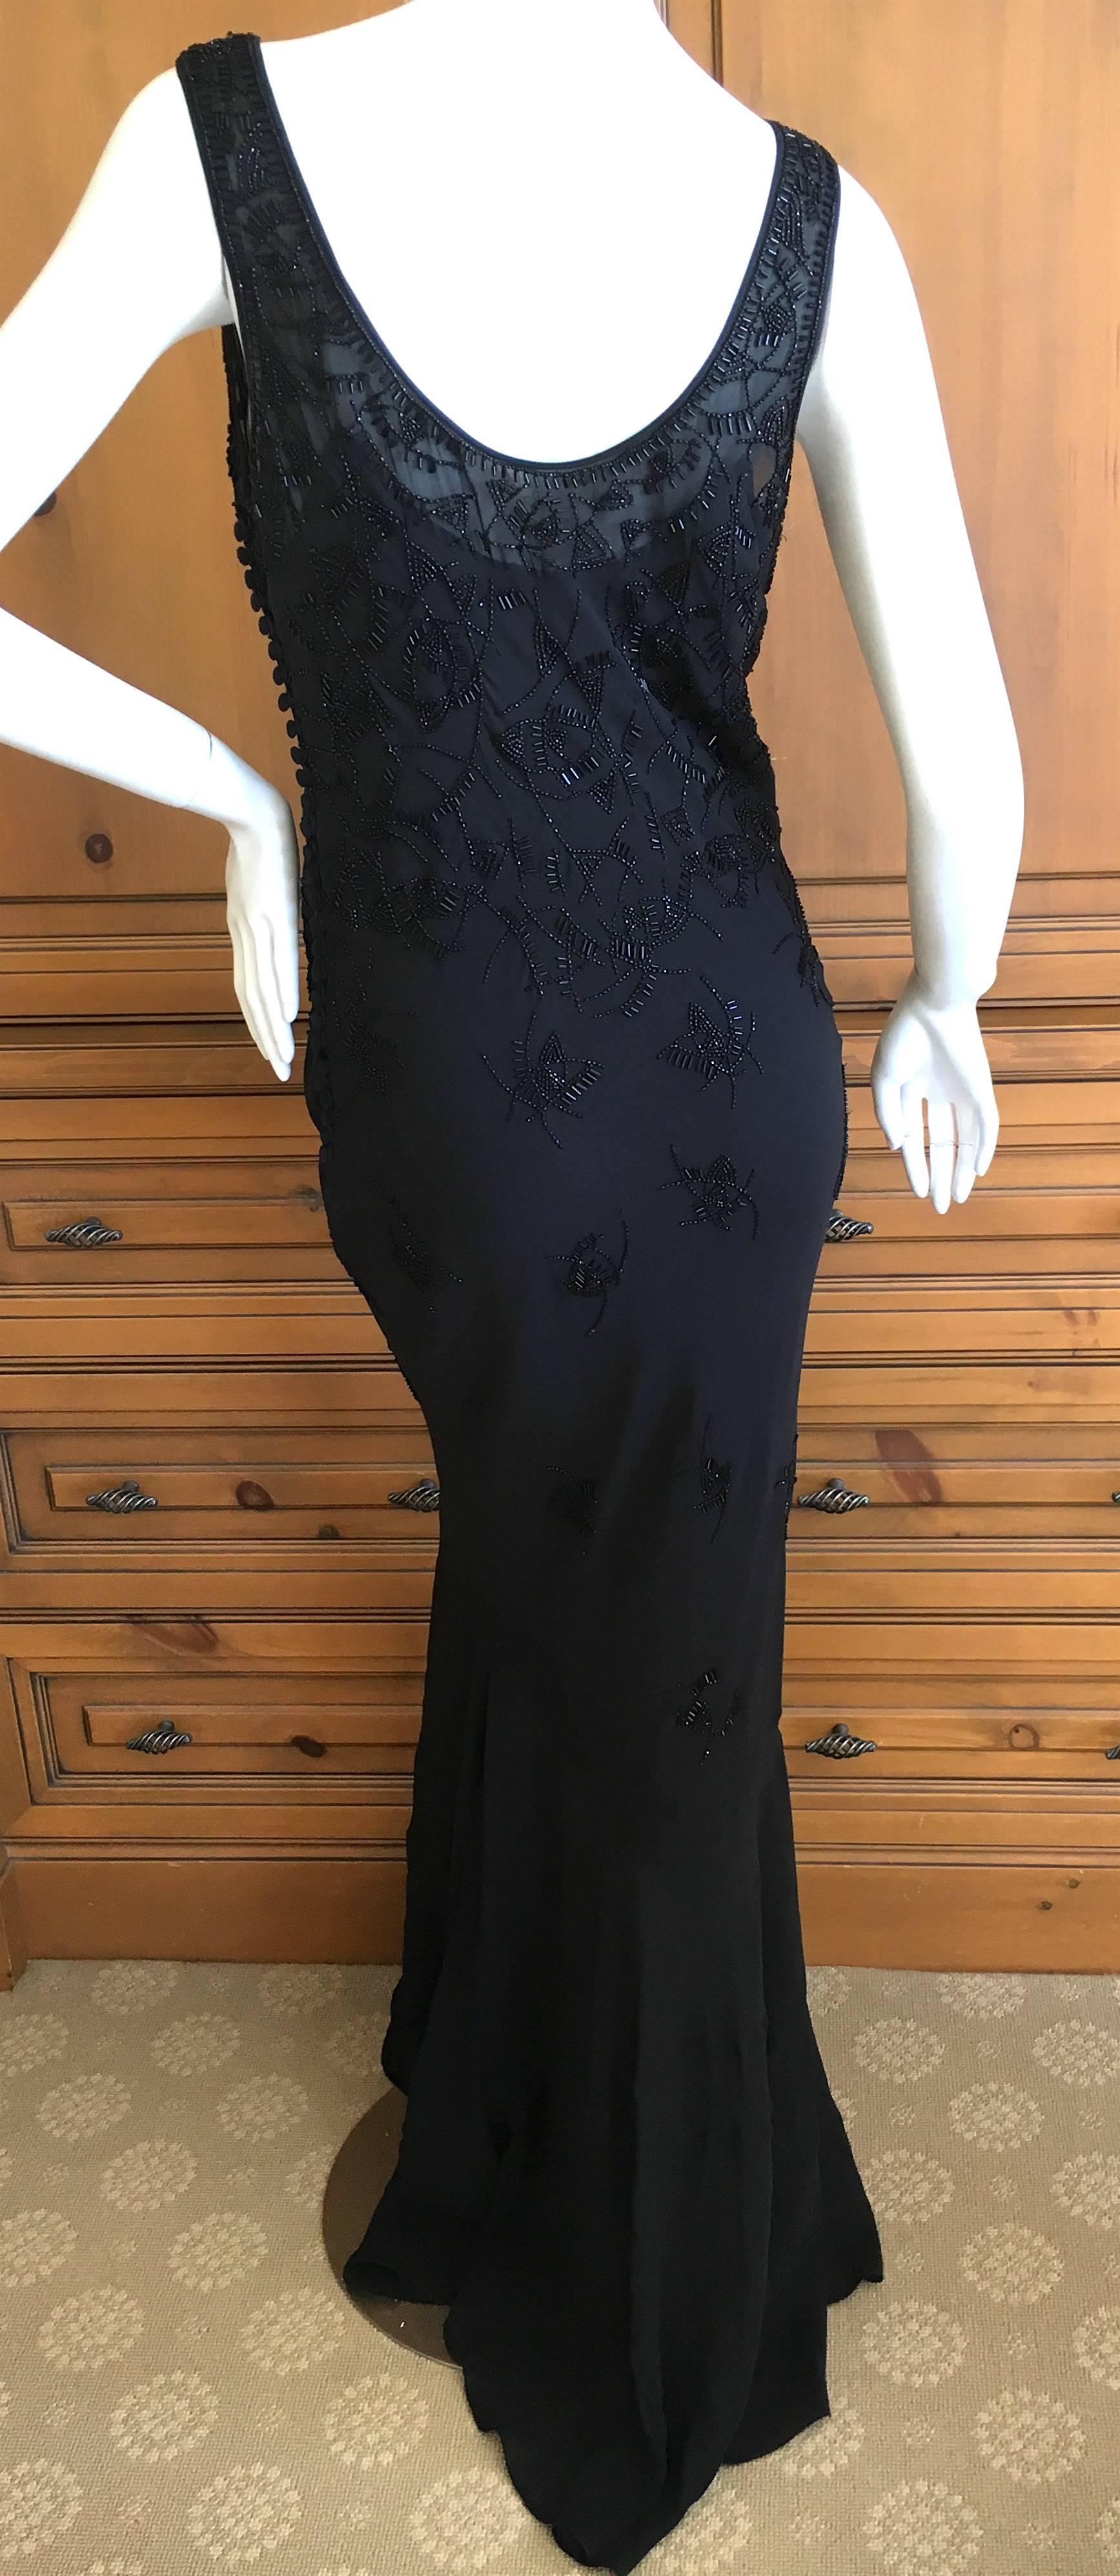 Christian Dior by John Galliano Bead Embellished Black Evening Dress For Sale 3